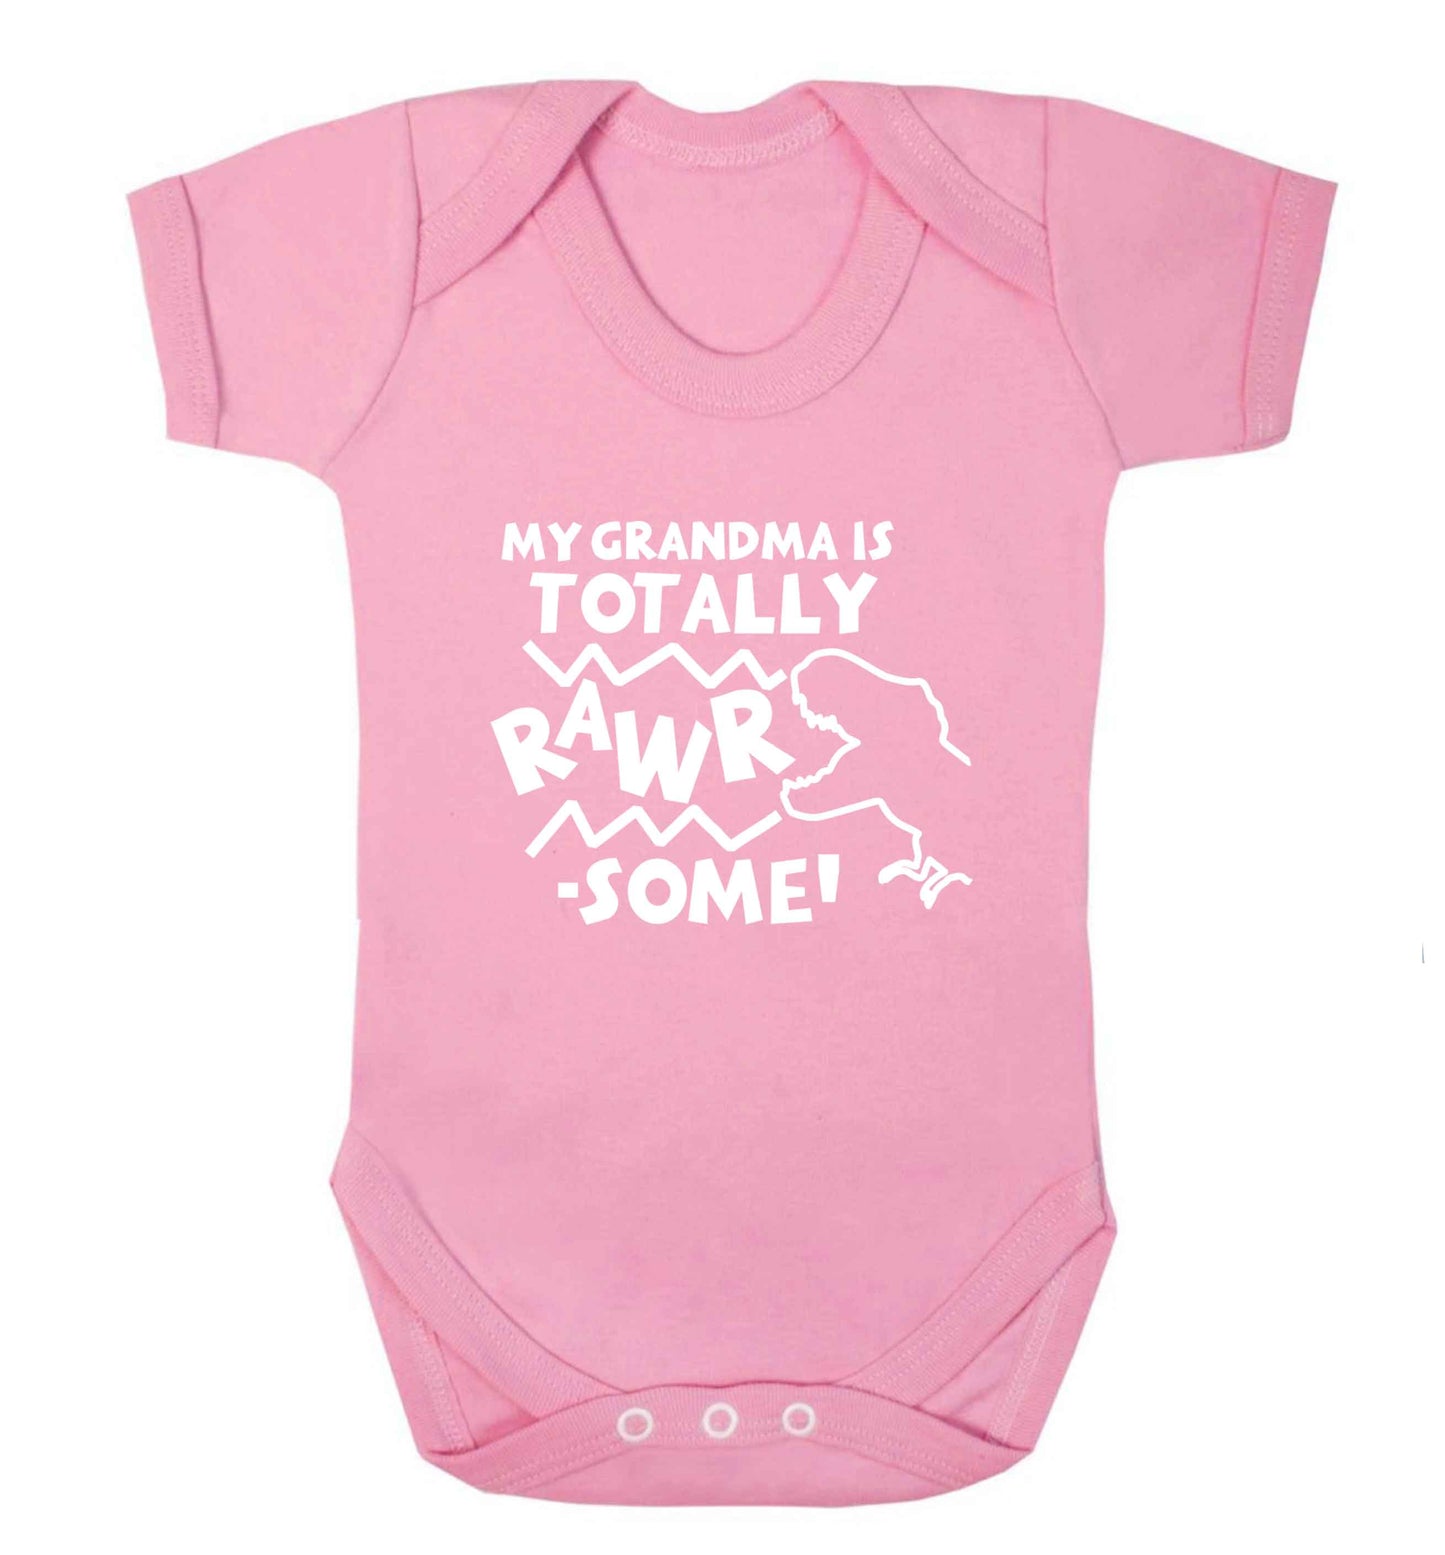 My grandma is totally rawrsome baby vest pale pink 18-24 months